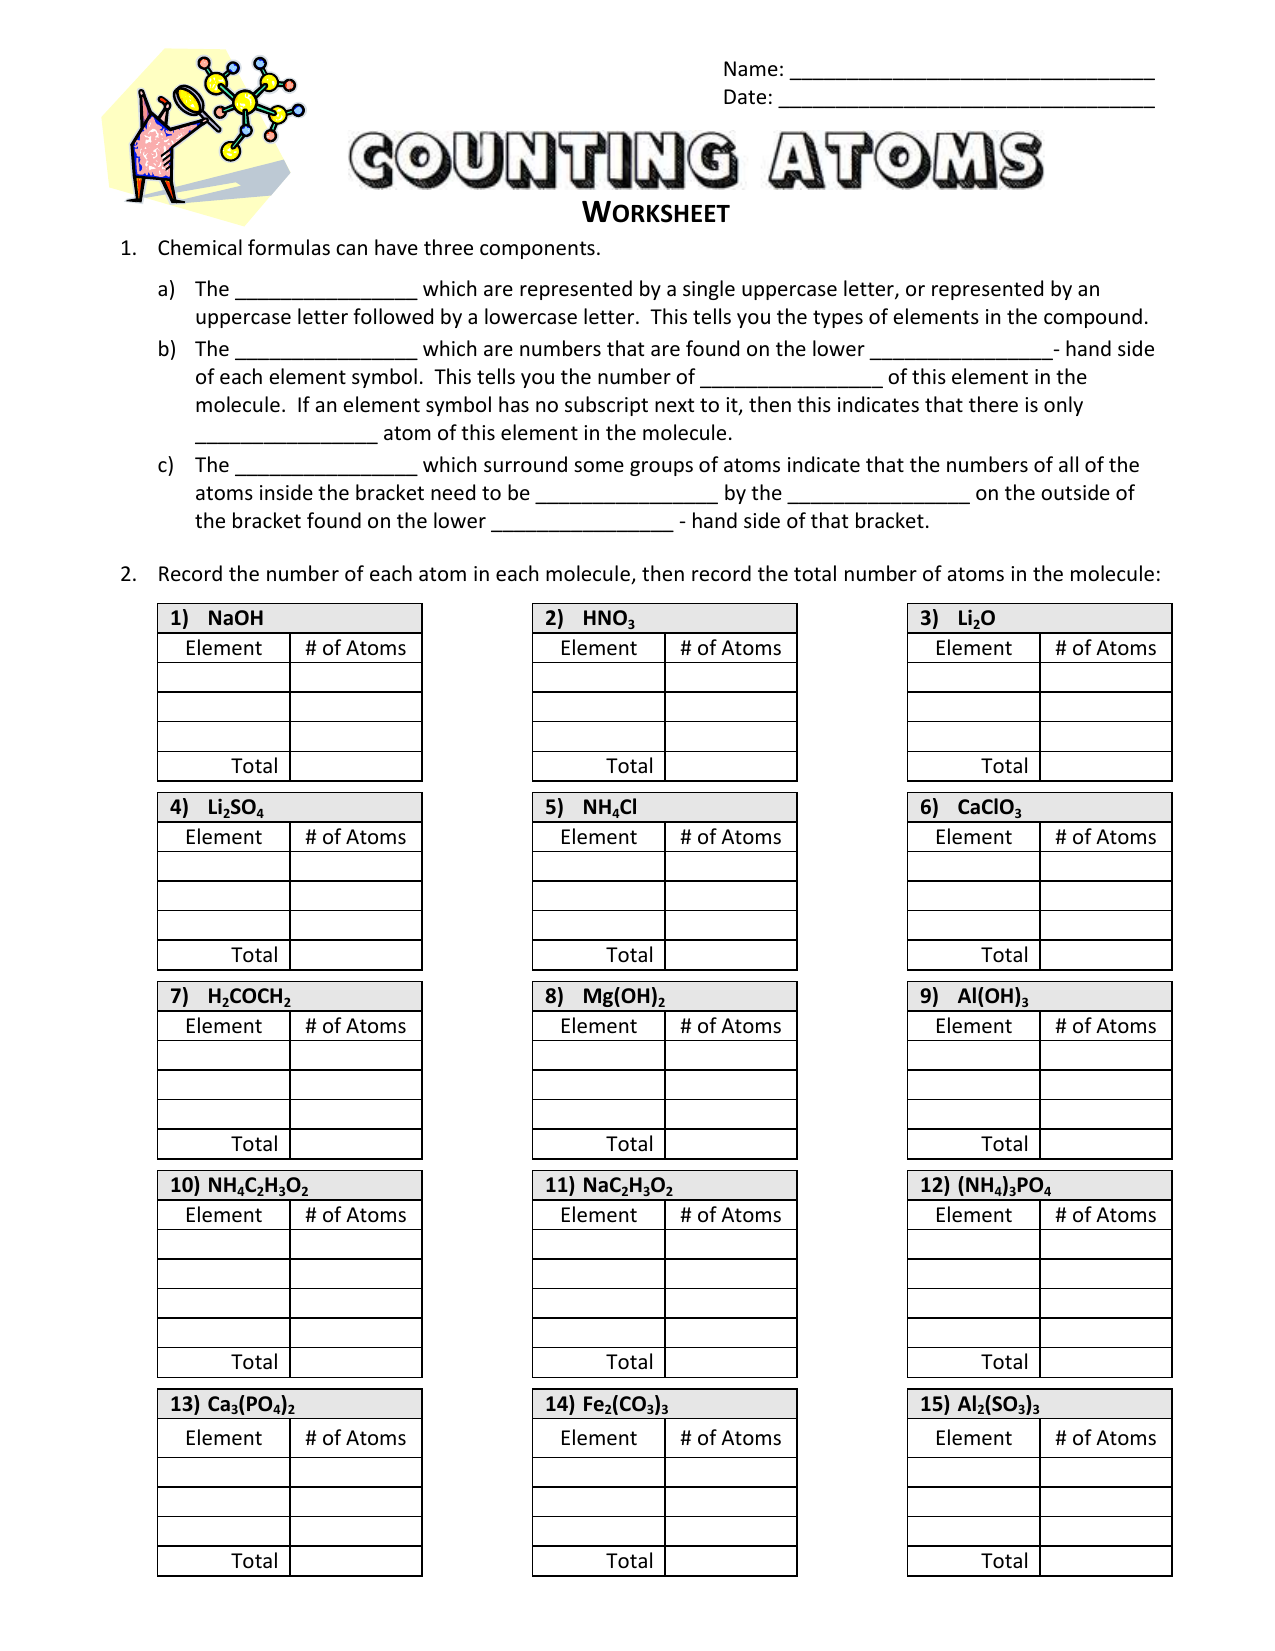 Counting Atoms - Worksheet Throughout Counting Atoms Worksheet Answers